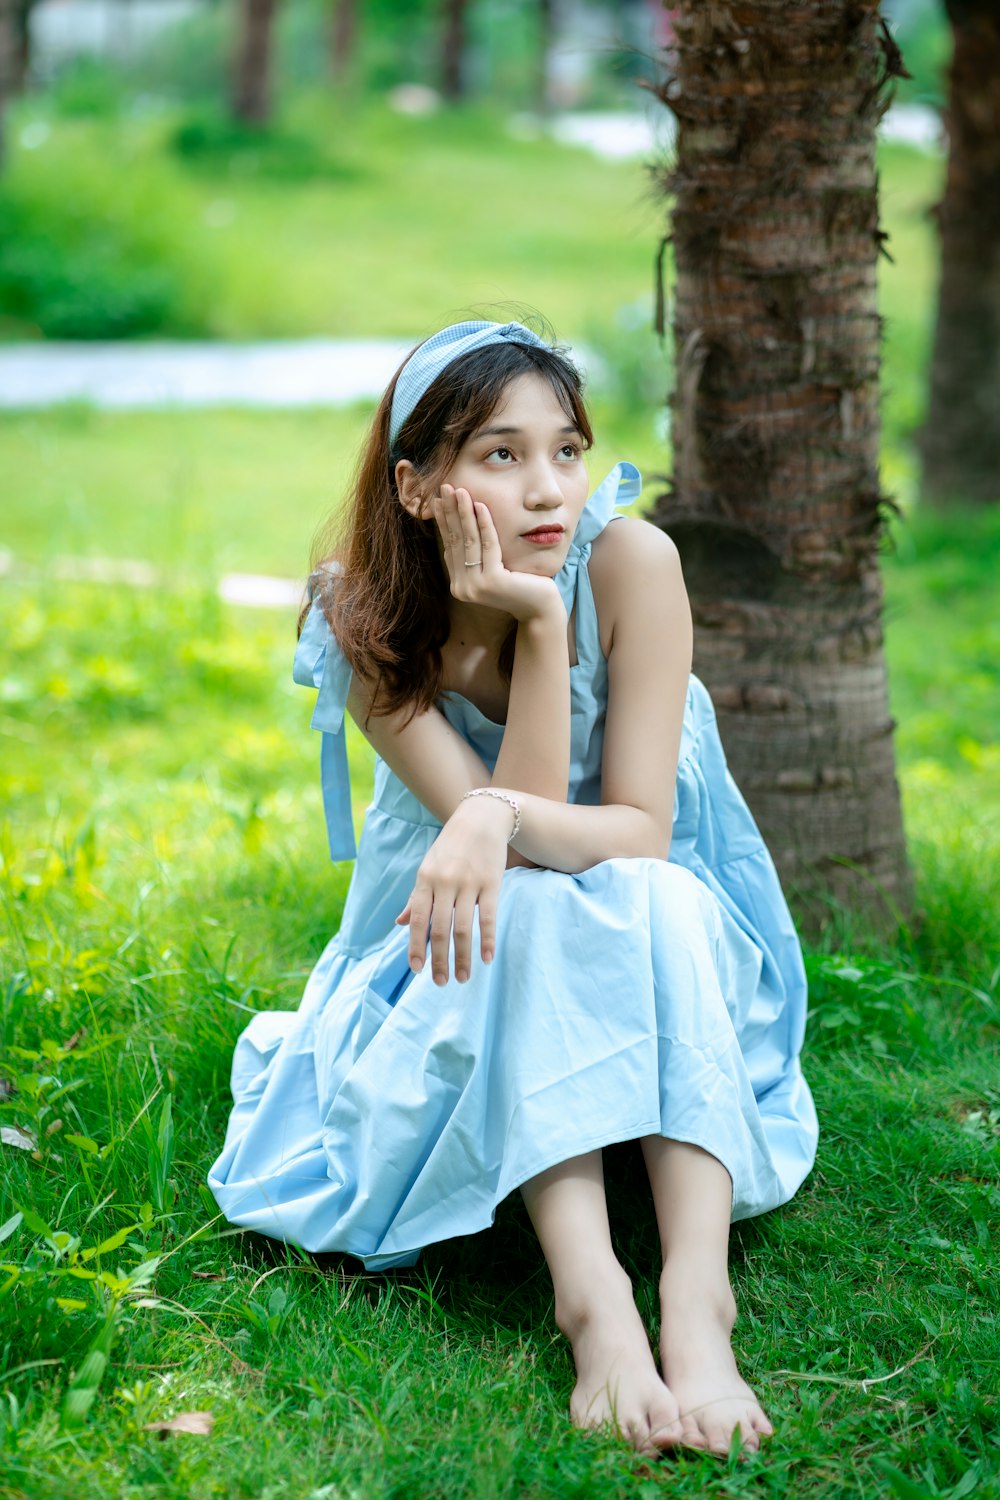 woman in blue dress sitting on green grass field during daytime